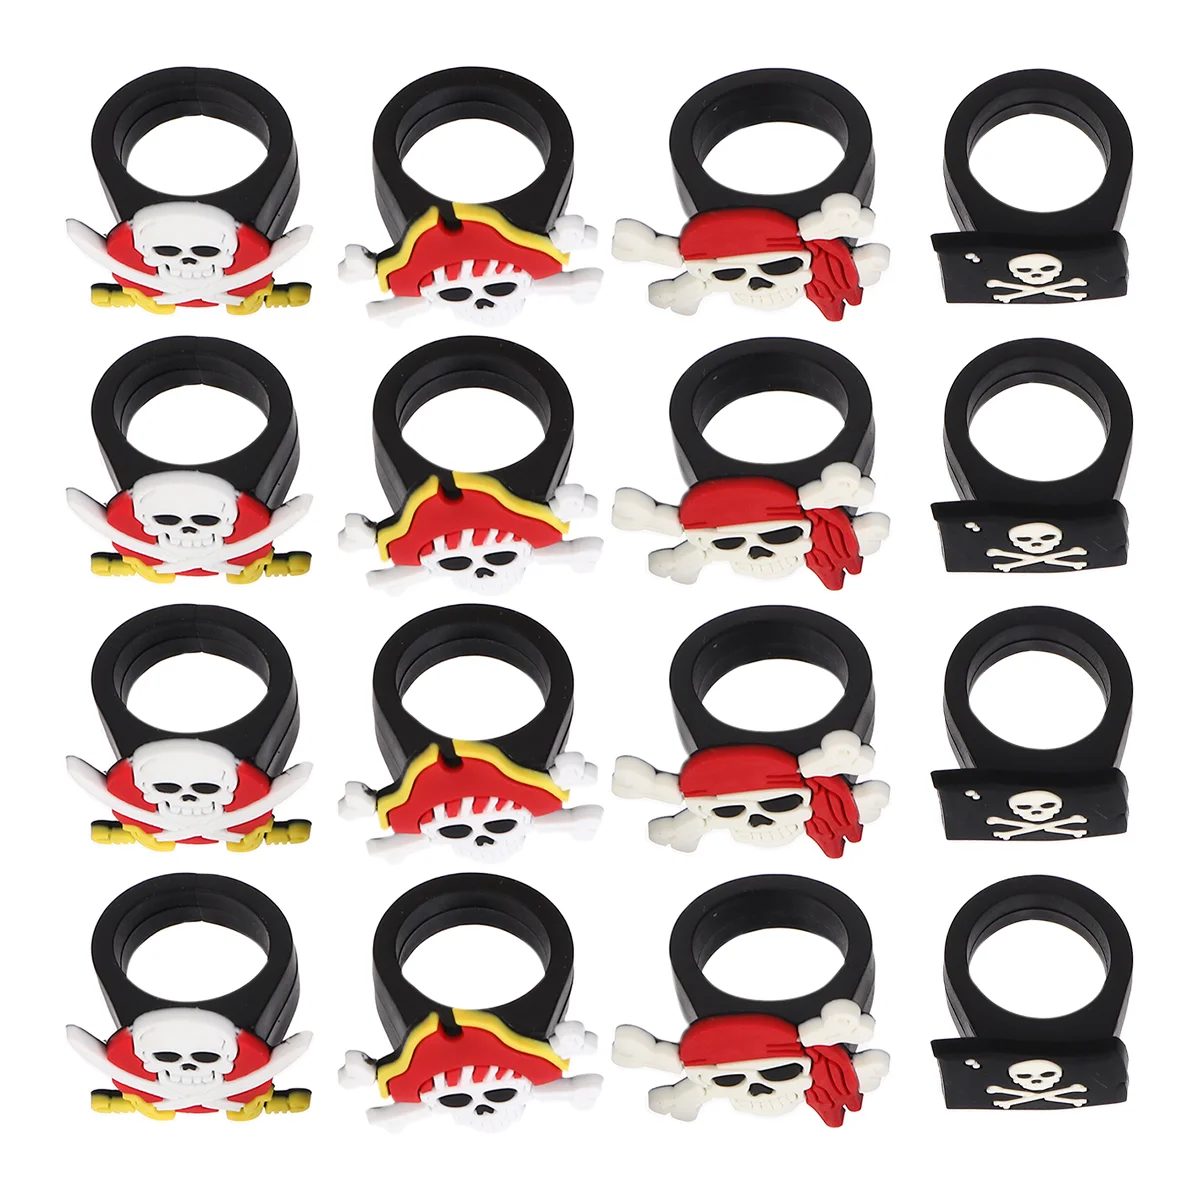 

16pcs Pirate Themed Pvc Rubber Ring Children's Rings (Assorted Color)